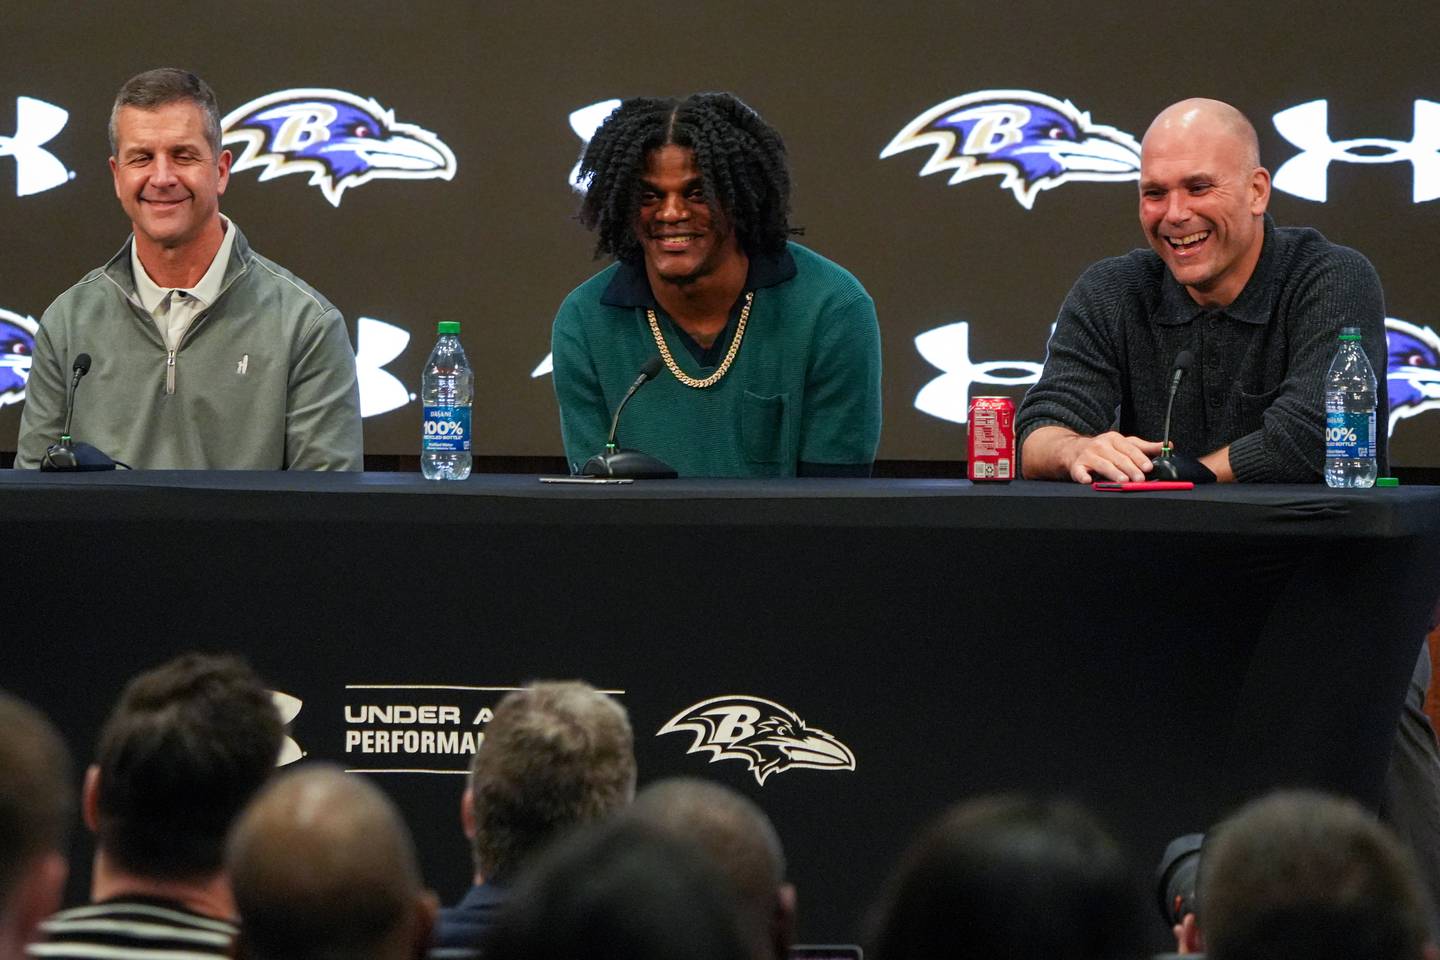 From left: Baltimore Ravens Head Coach John Harbaugh, quarterback Lamar Jackson and General Manager Eric DeCosta laugh as they answer questions during a press conference at the Under Armour Performance Center on Thursday, May 4. Jackson and the Ravens recently came to an agreement on his contract extension, a 5-year deal worth $260 million.